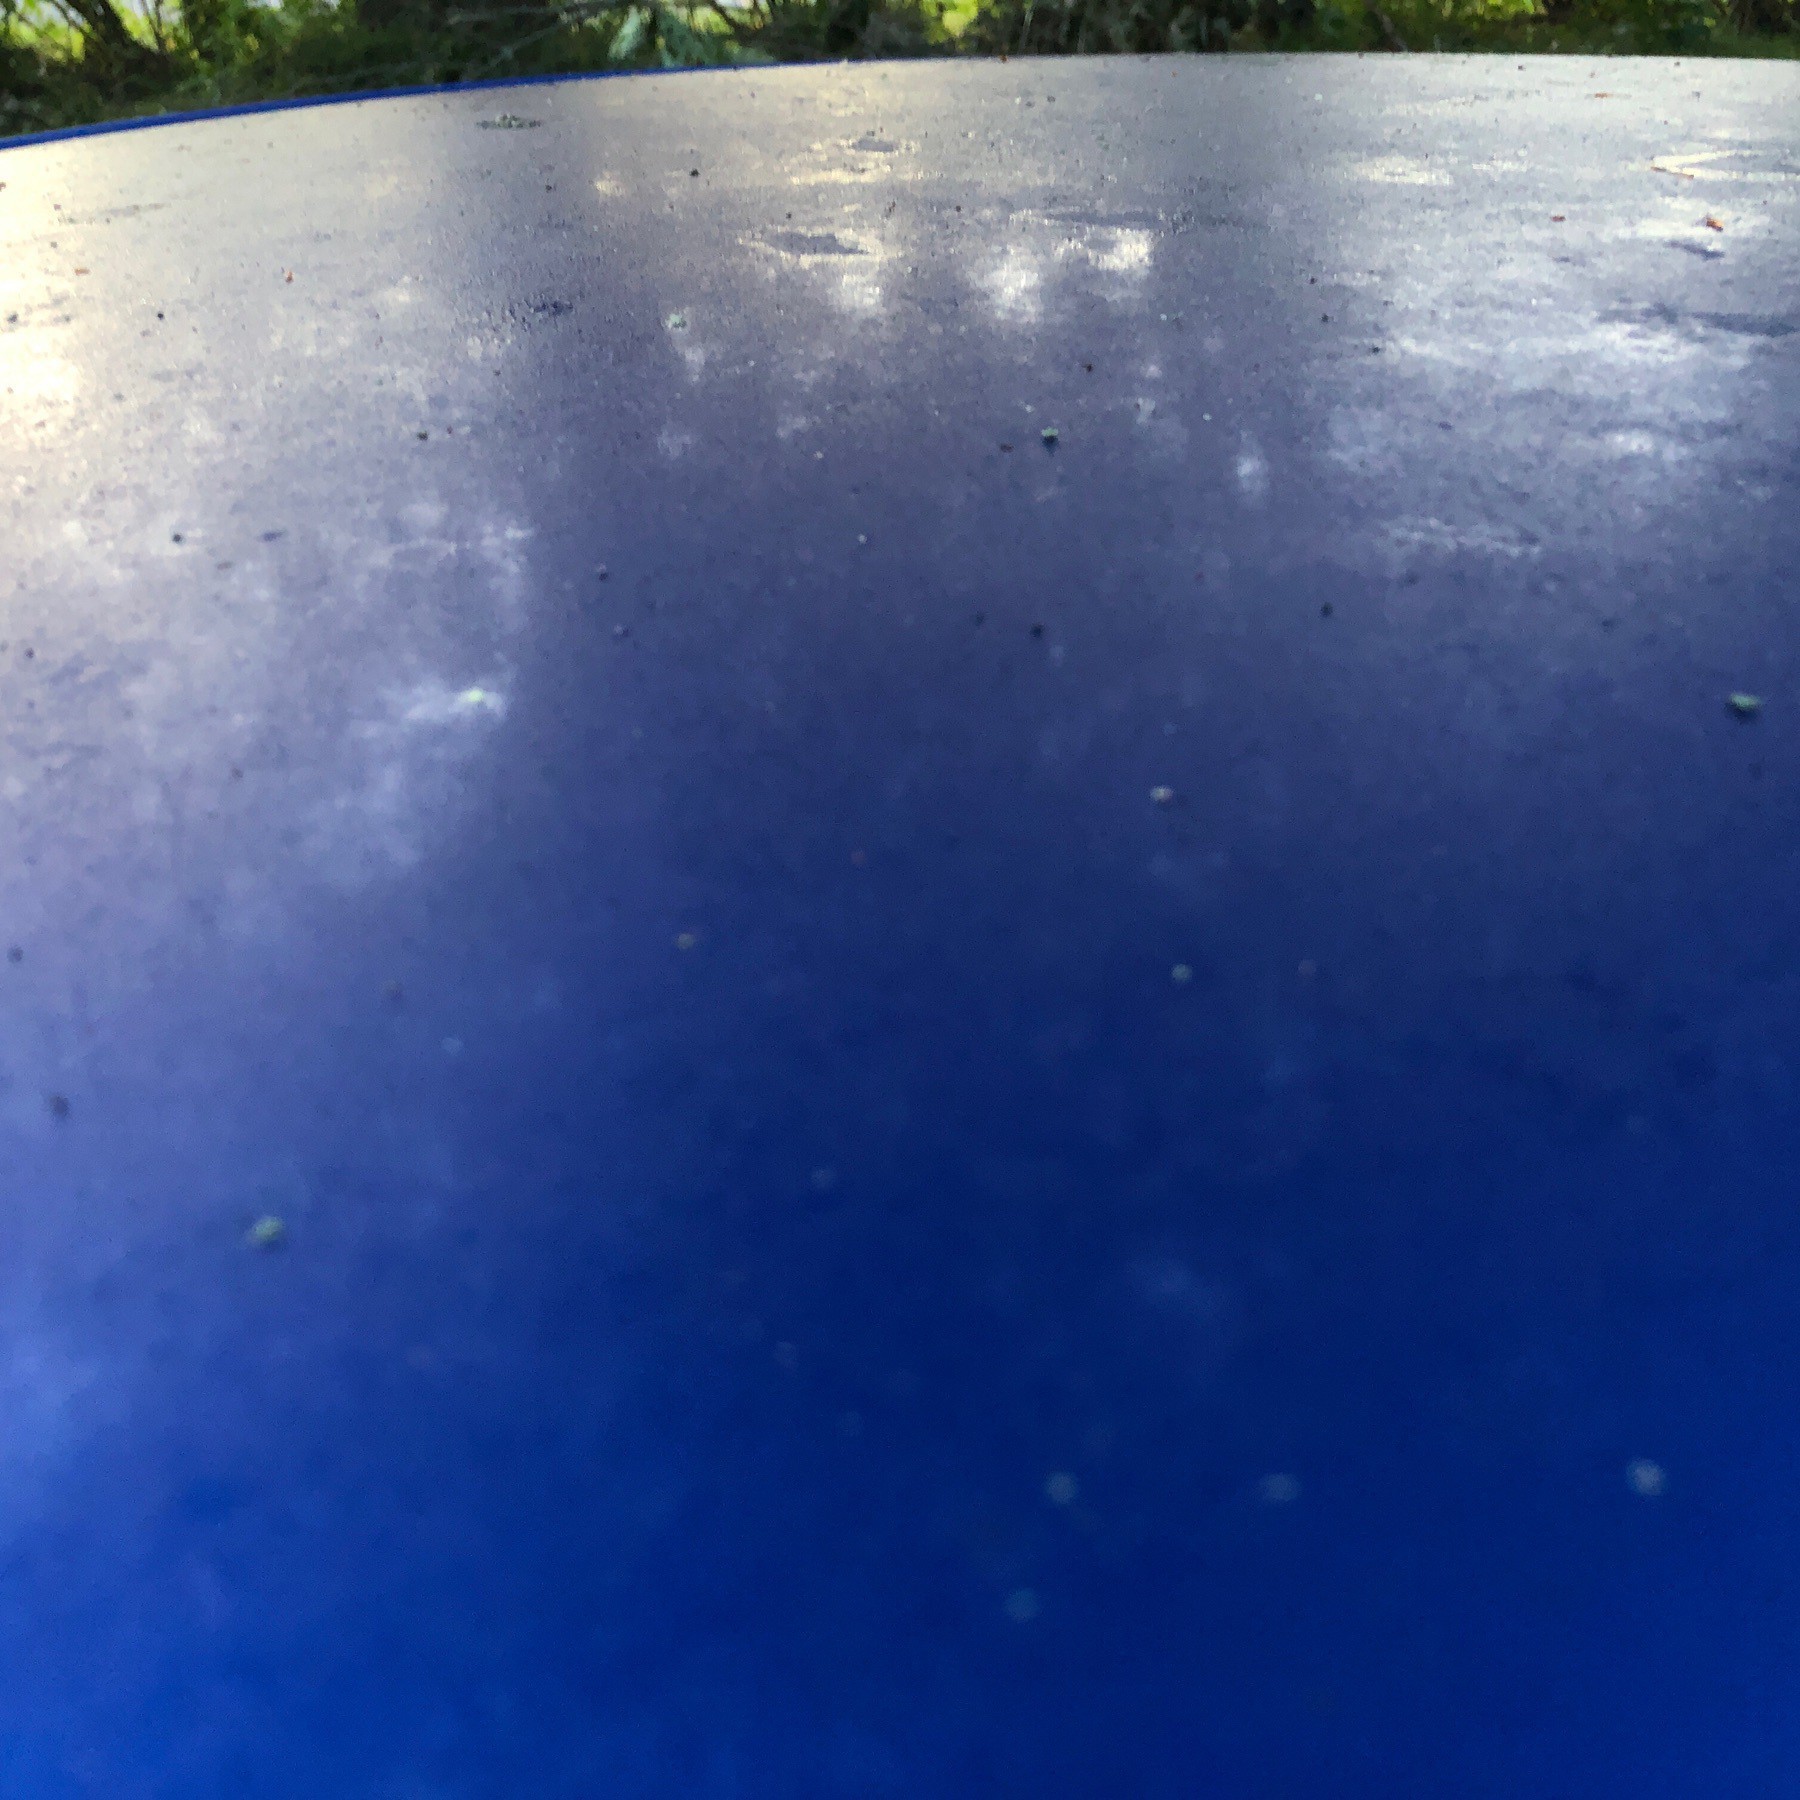 Dew on car roof.